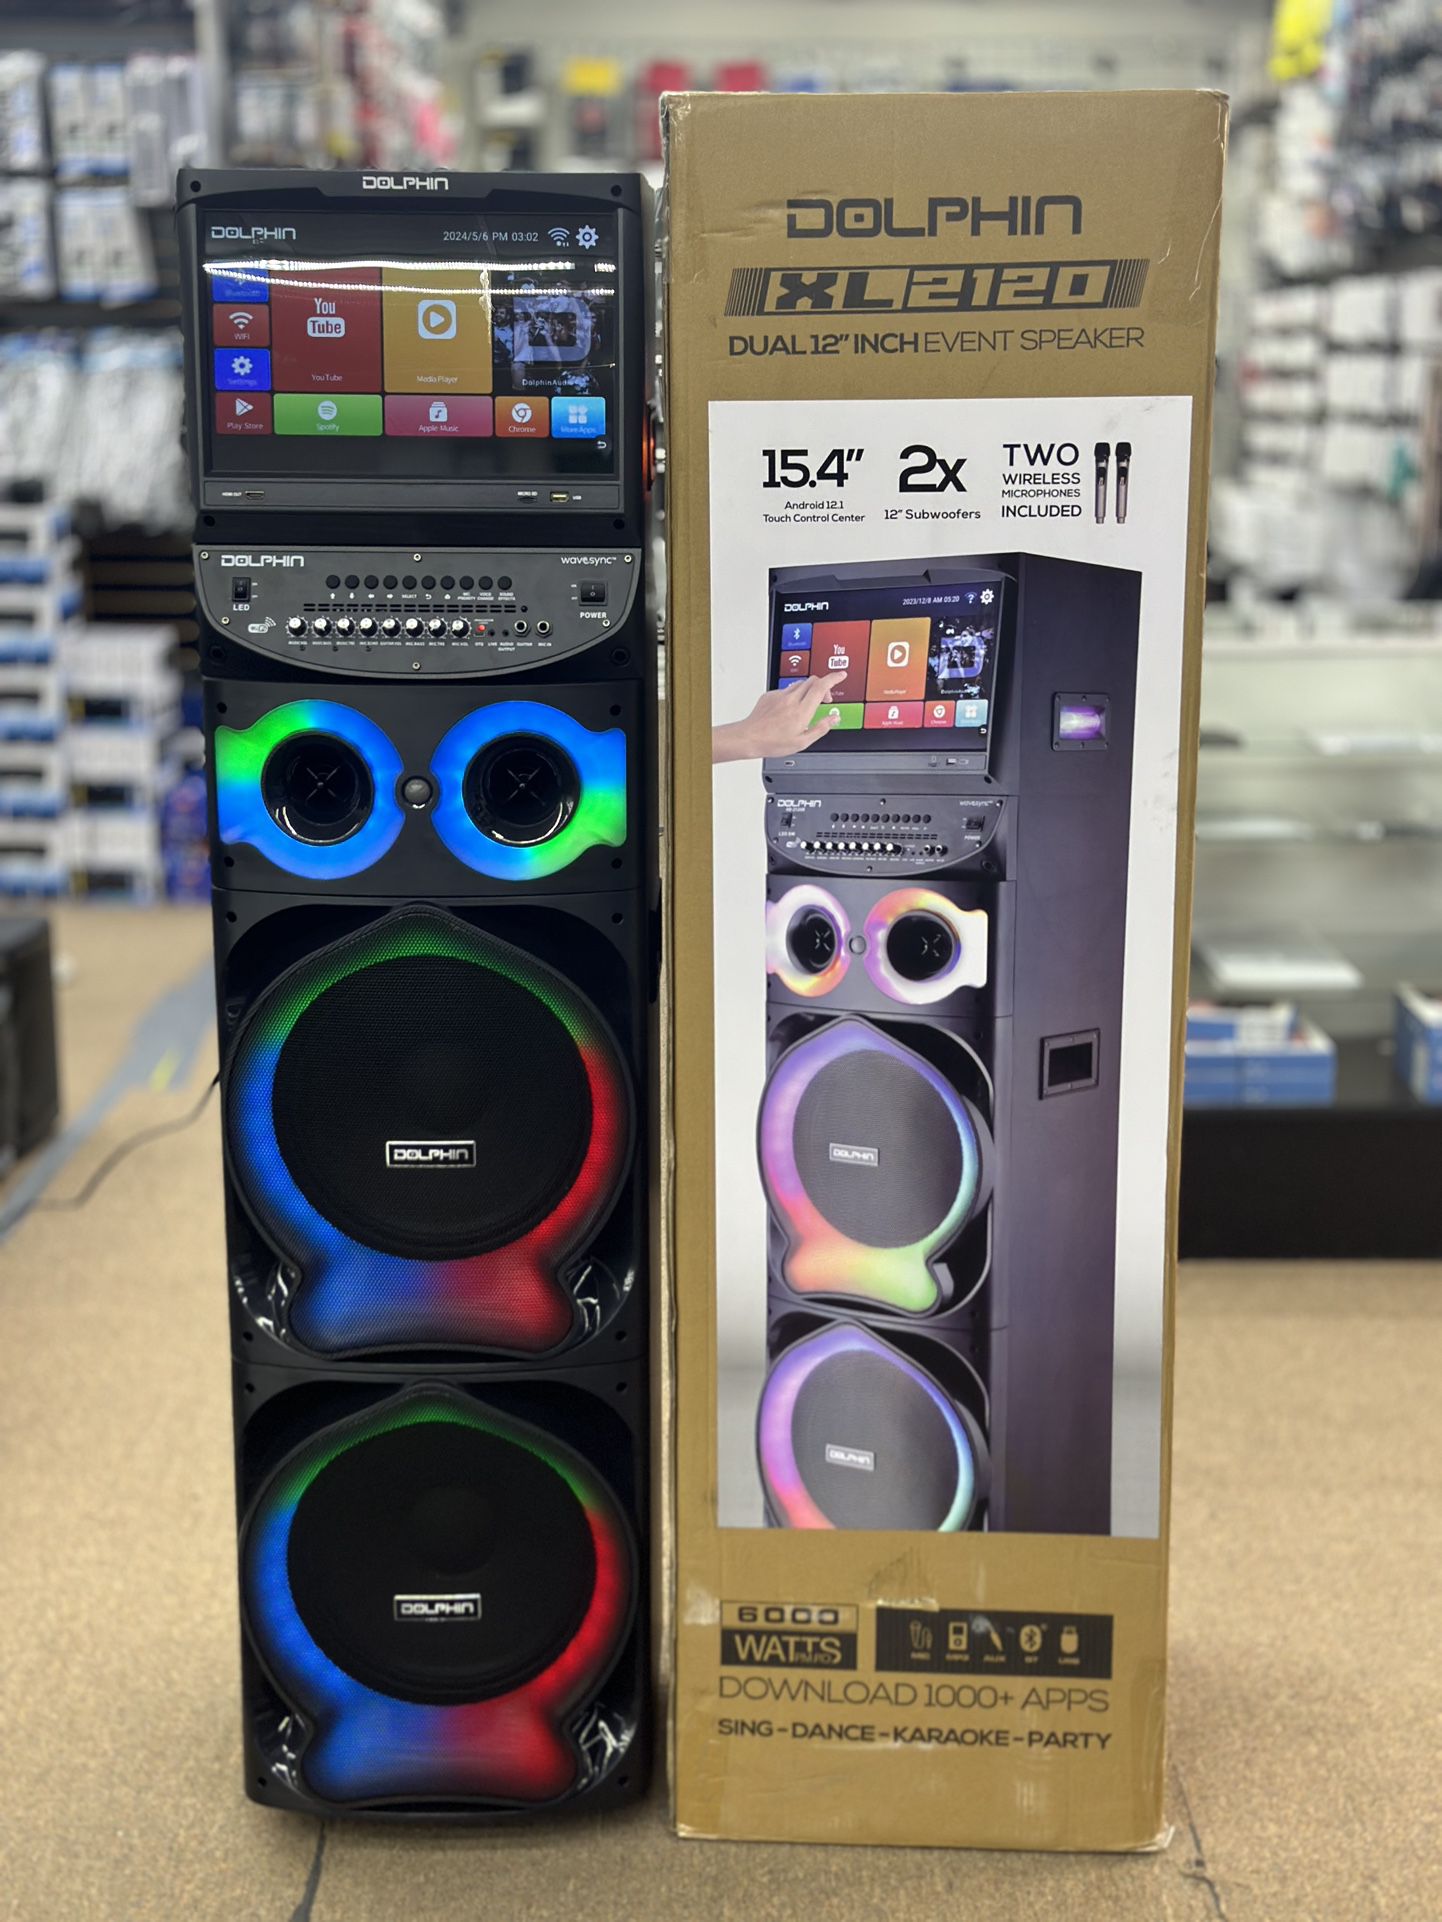 High-End Party Speaker: 15.4" Touch Screen and Dual 12" Subwoofers with 2 Wireless Microphones